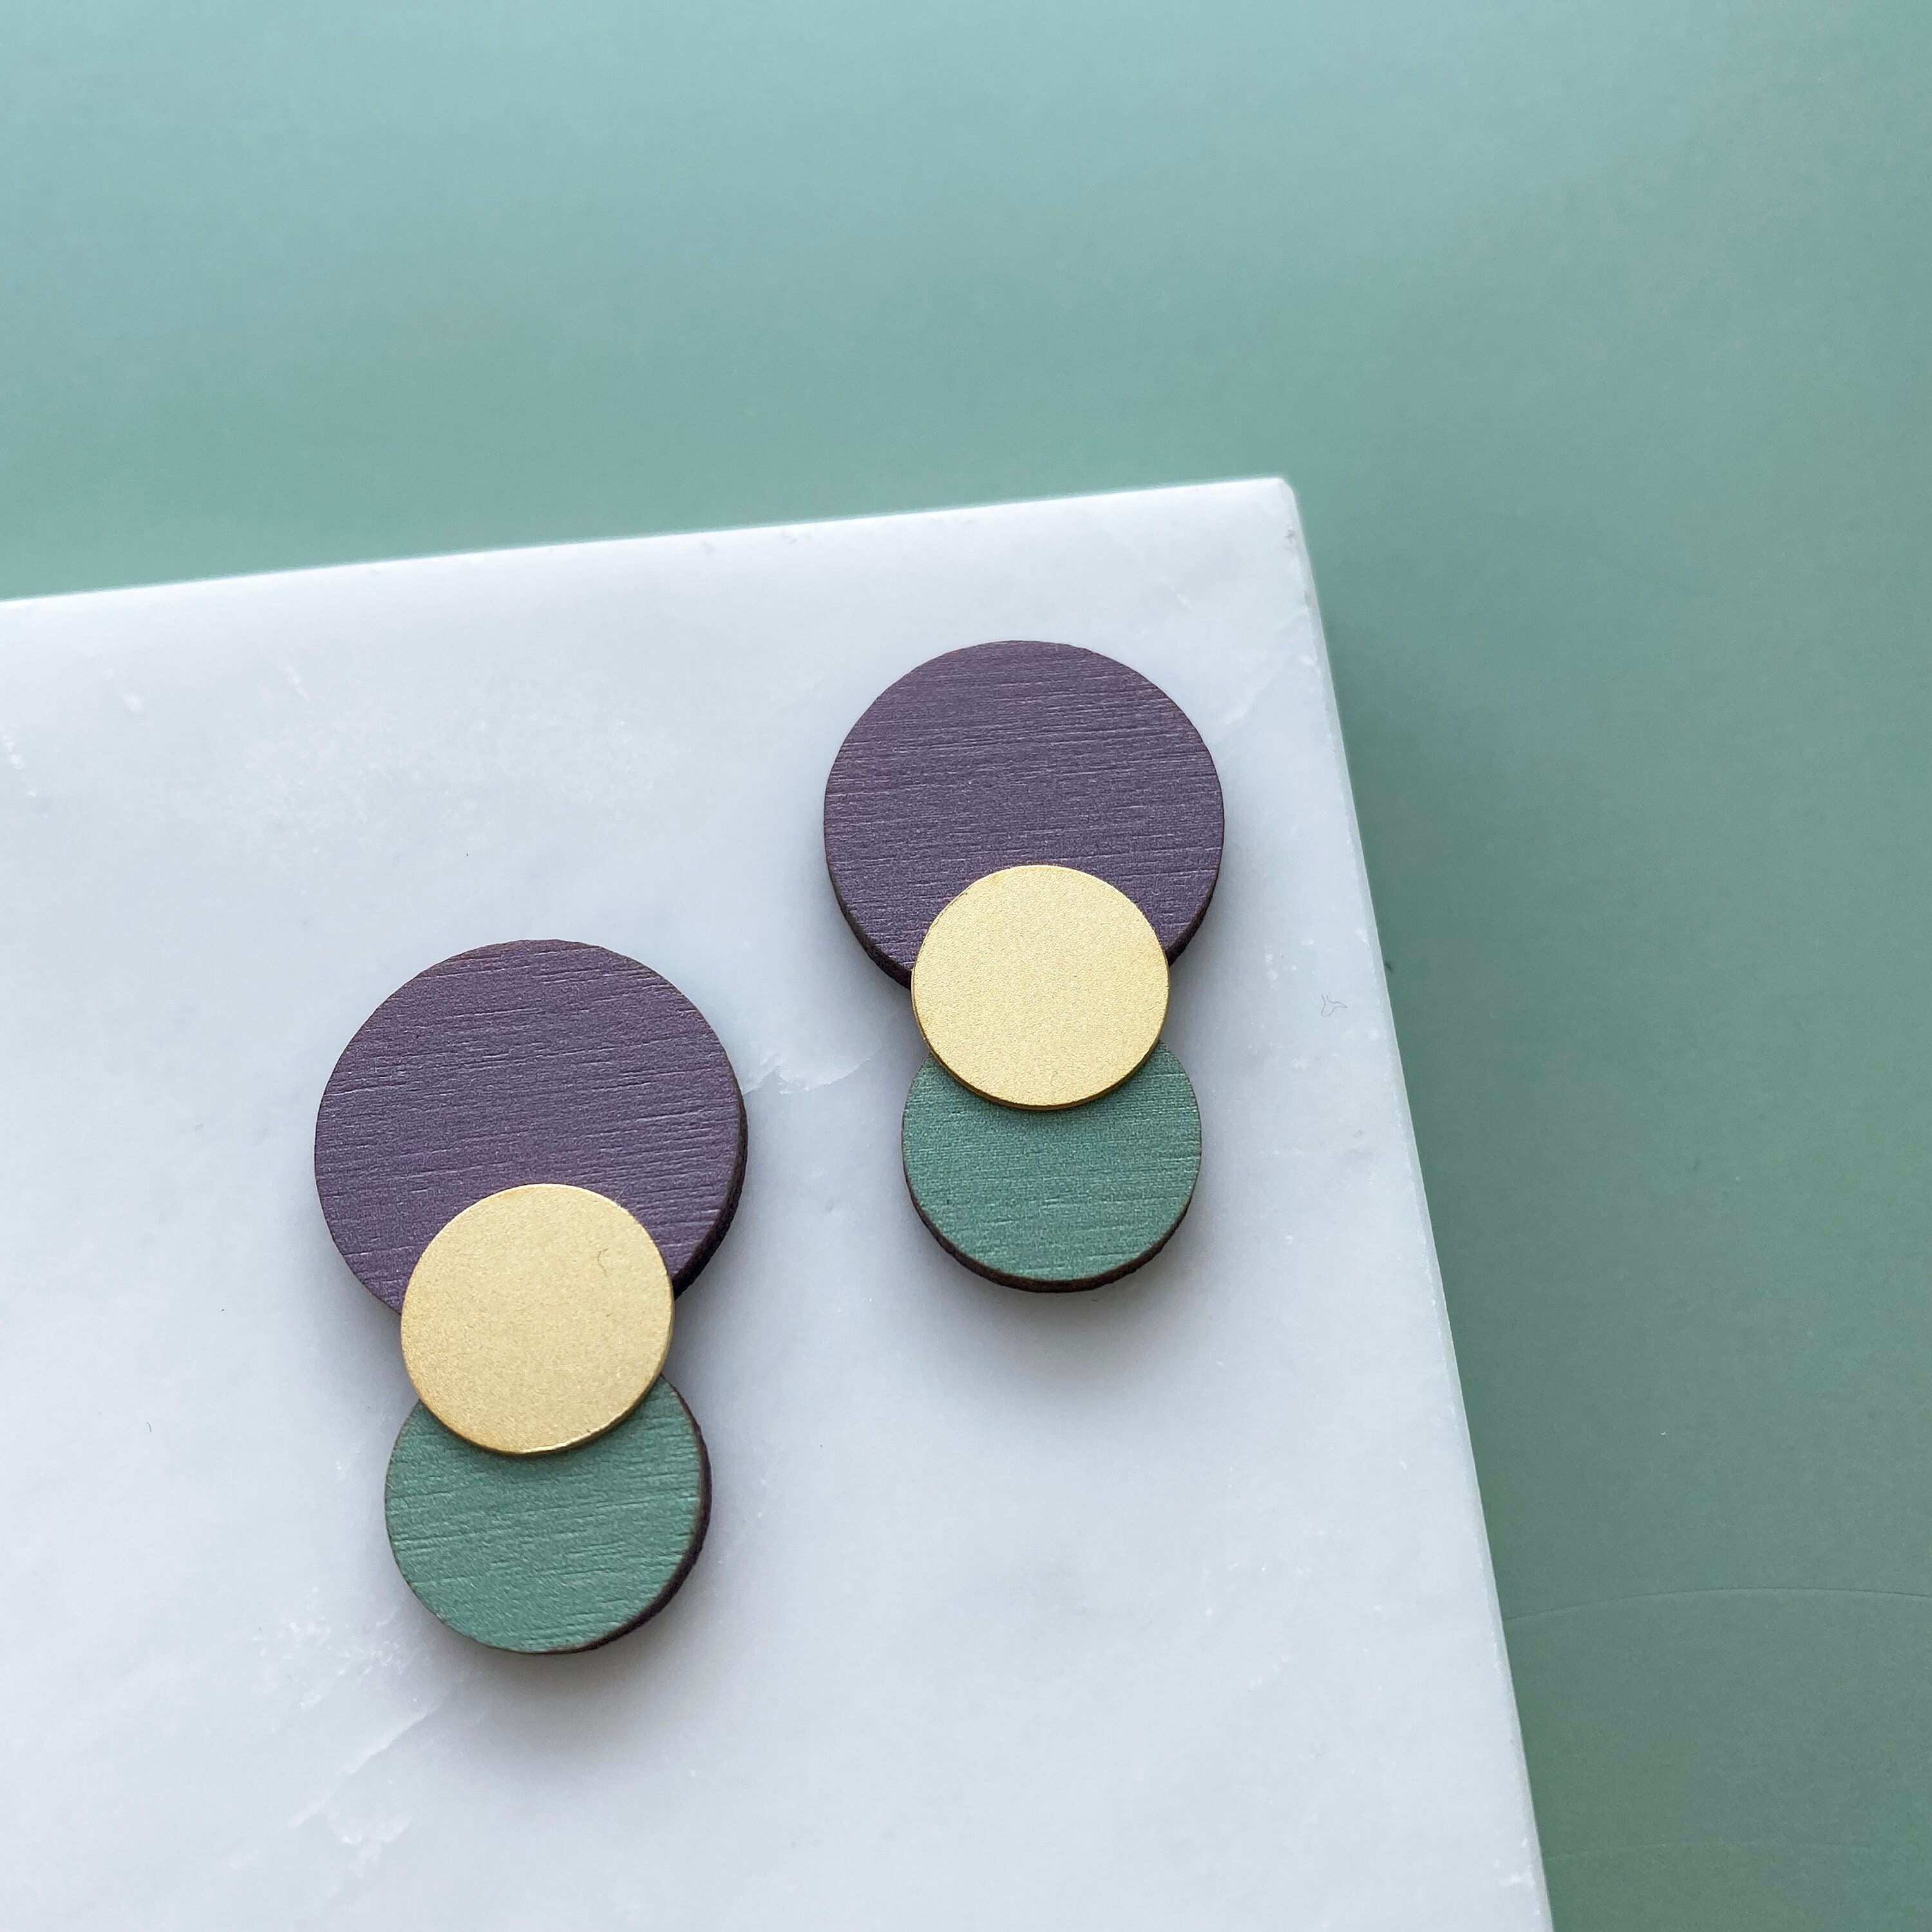 Statement Circle Stud Earrings - Geometric Gold Studs Minimal Jewellery Gift For Her 6 Colours